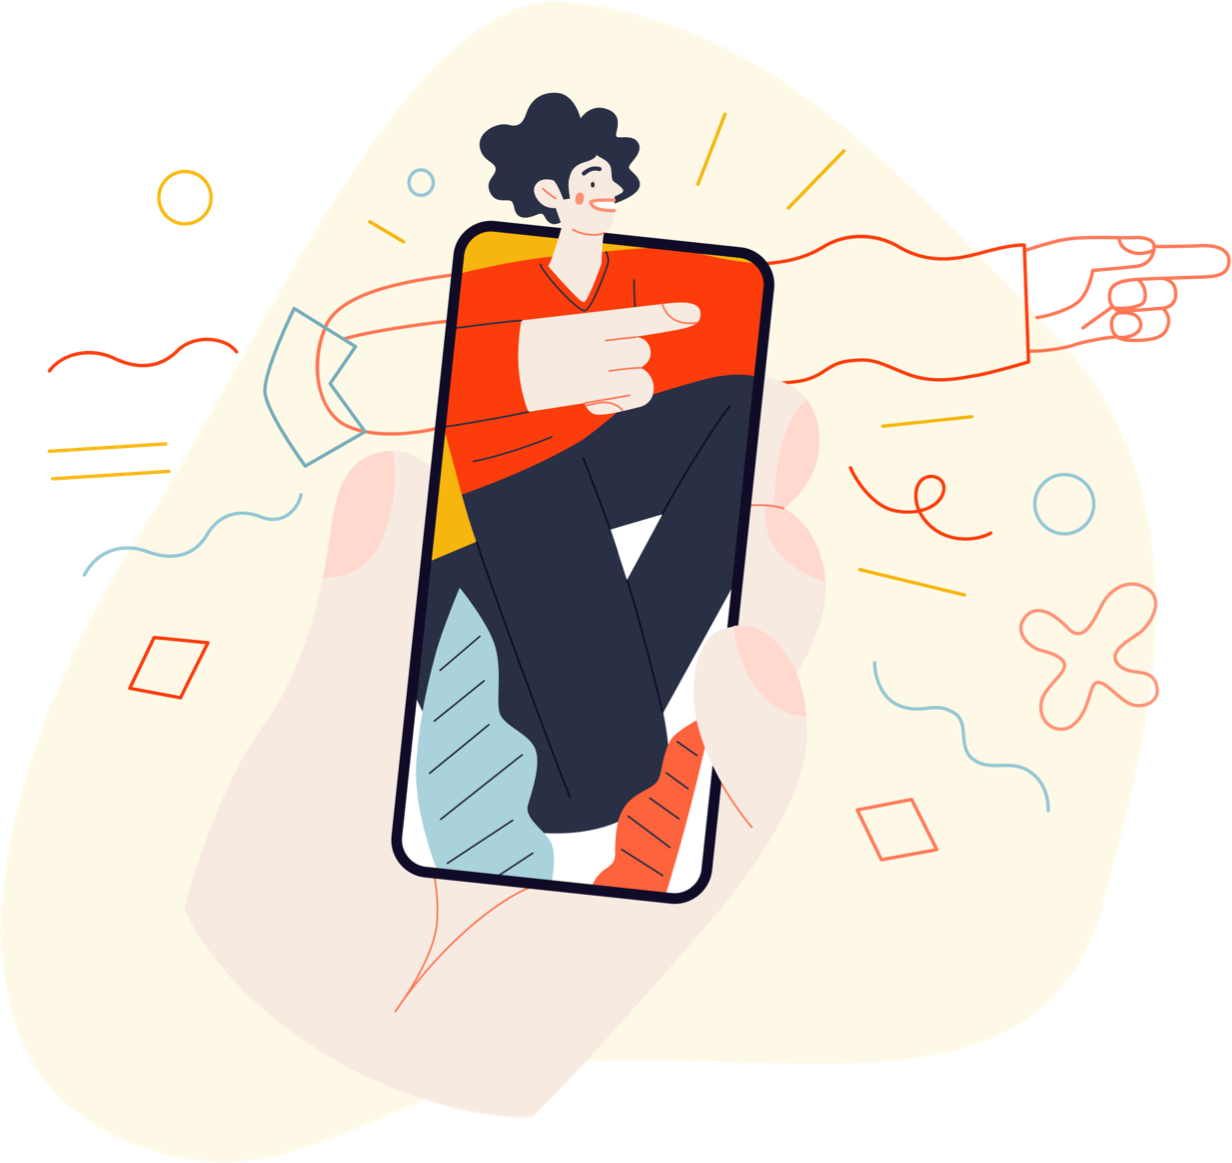 Illustration of a person, held within the frame of a smart phone